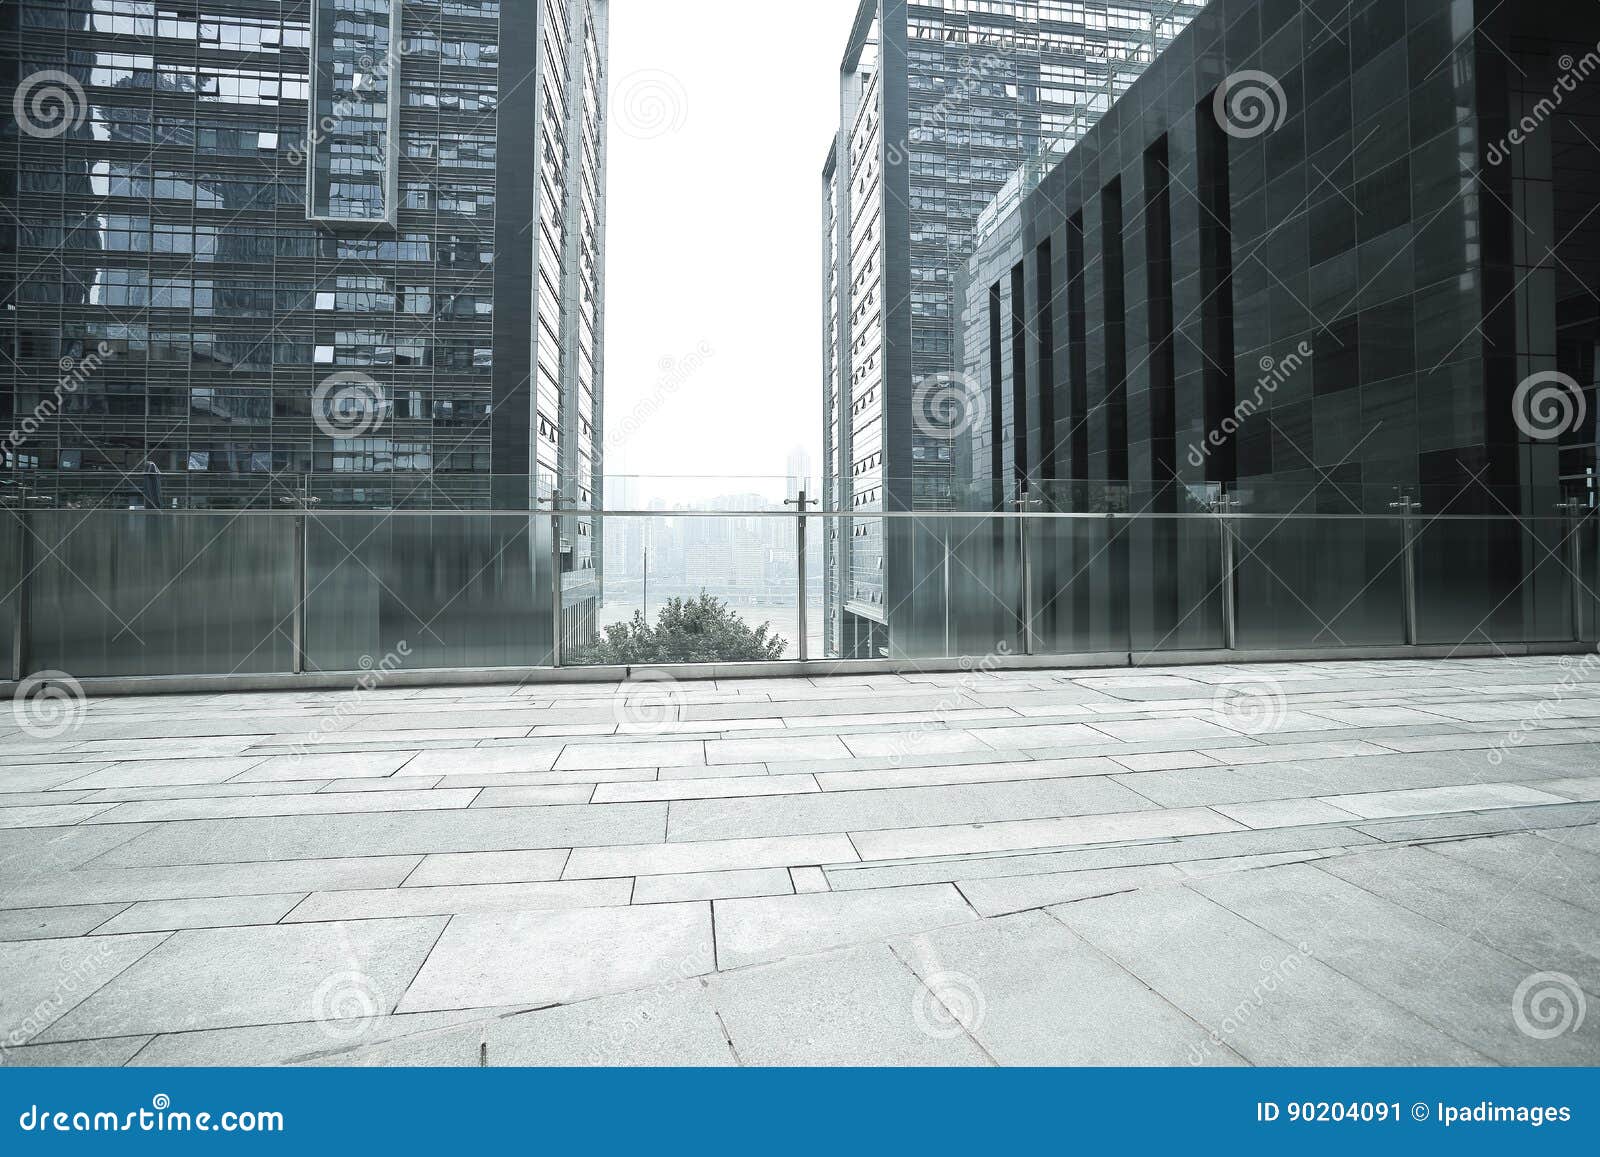 3,663 Empty Road Floor Modern Building Background Stock Photos - Free &  Royalty-Free Stock Photos from Dreamstime